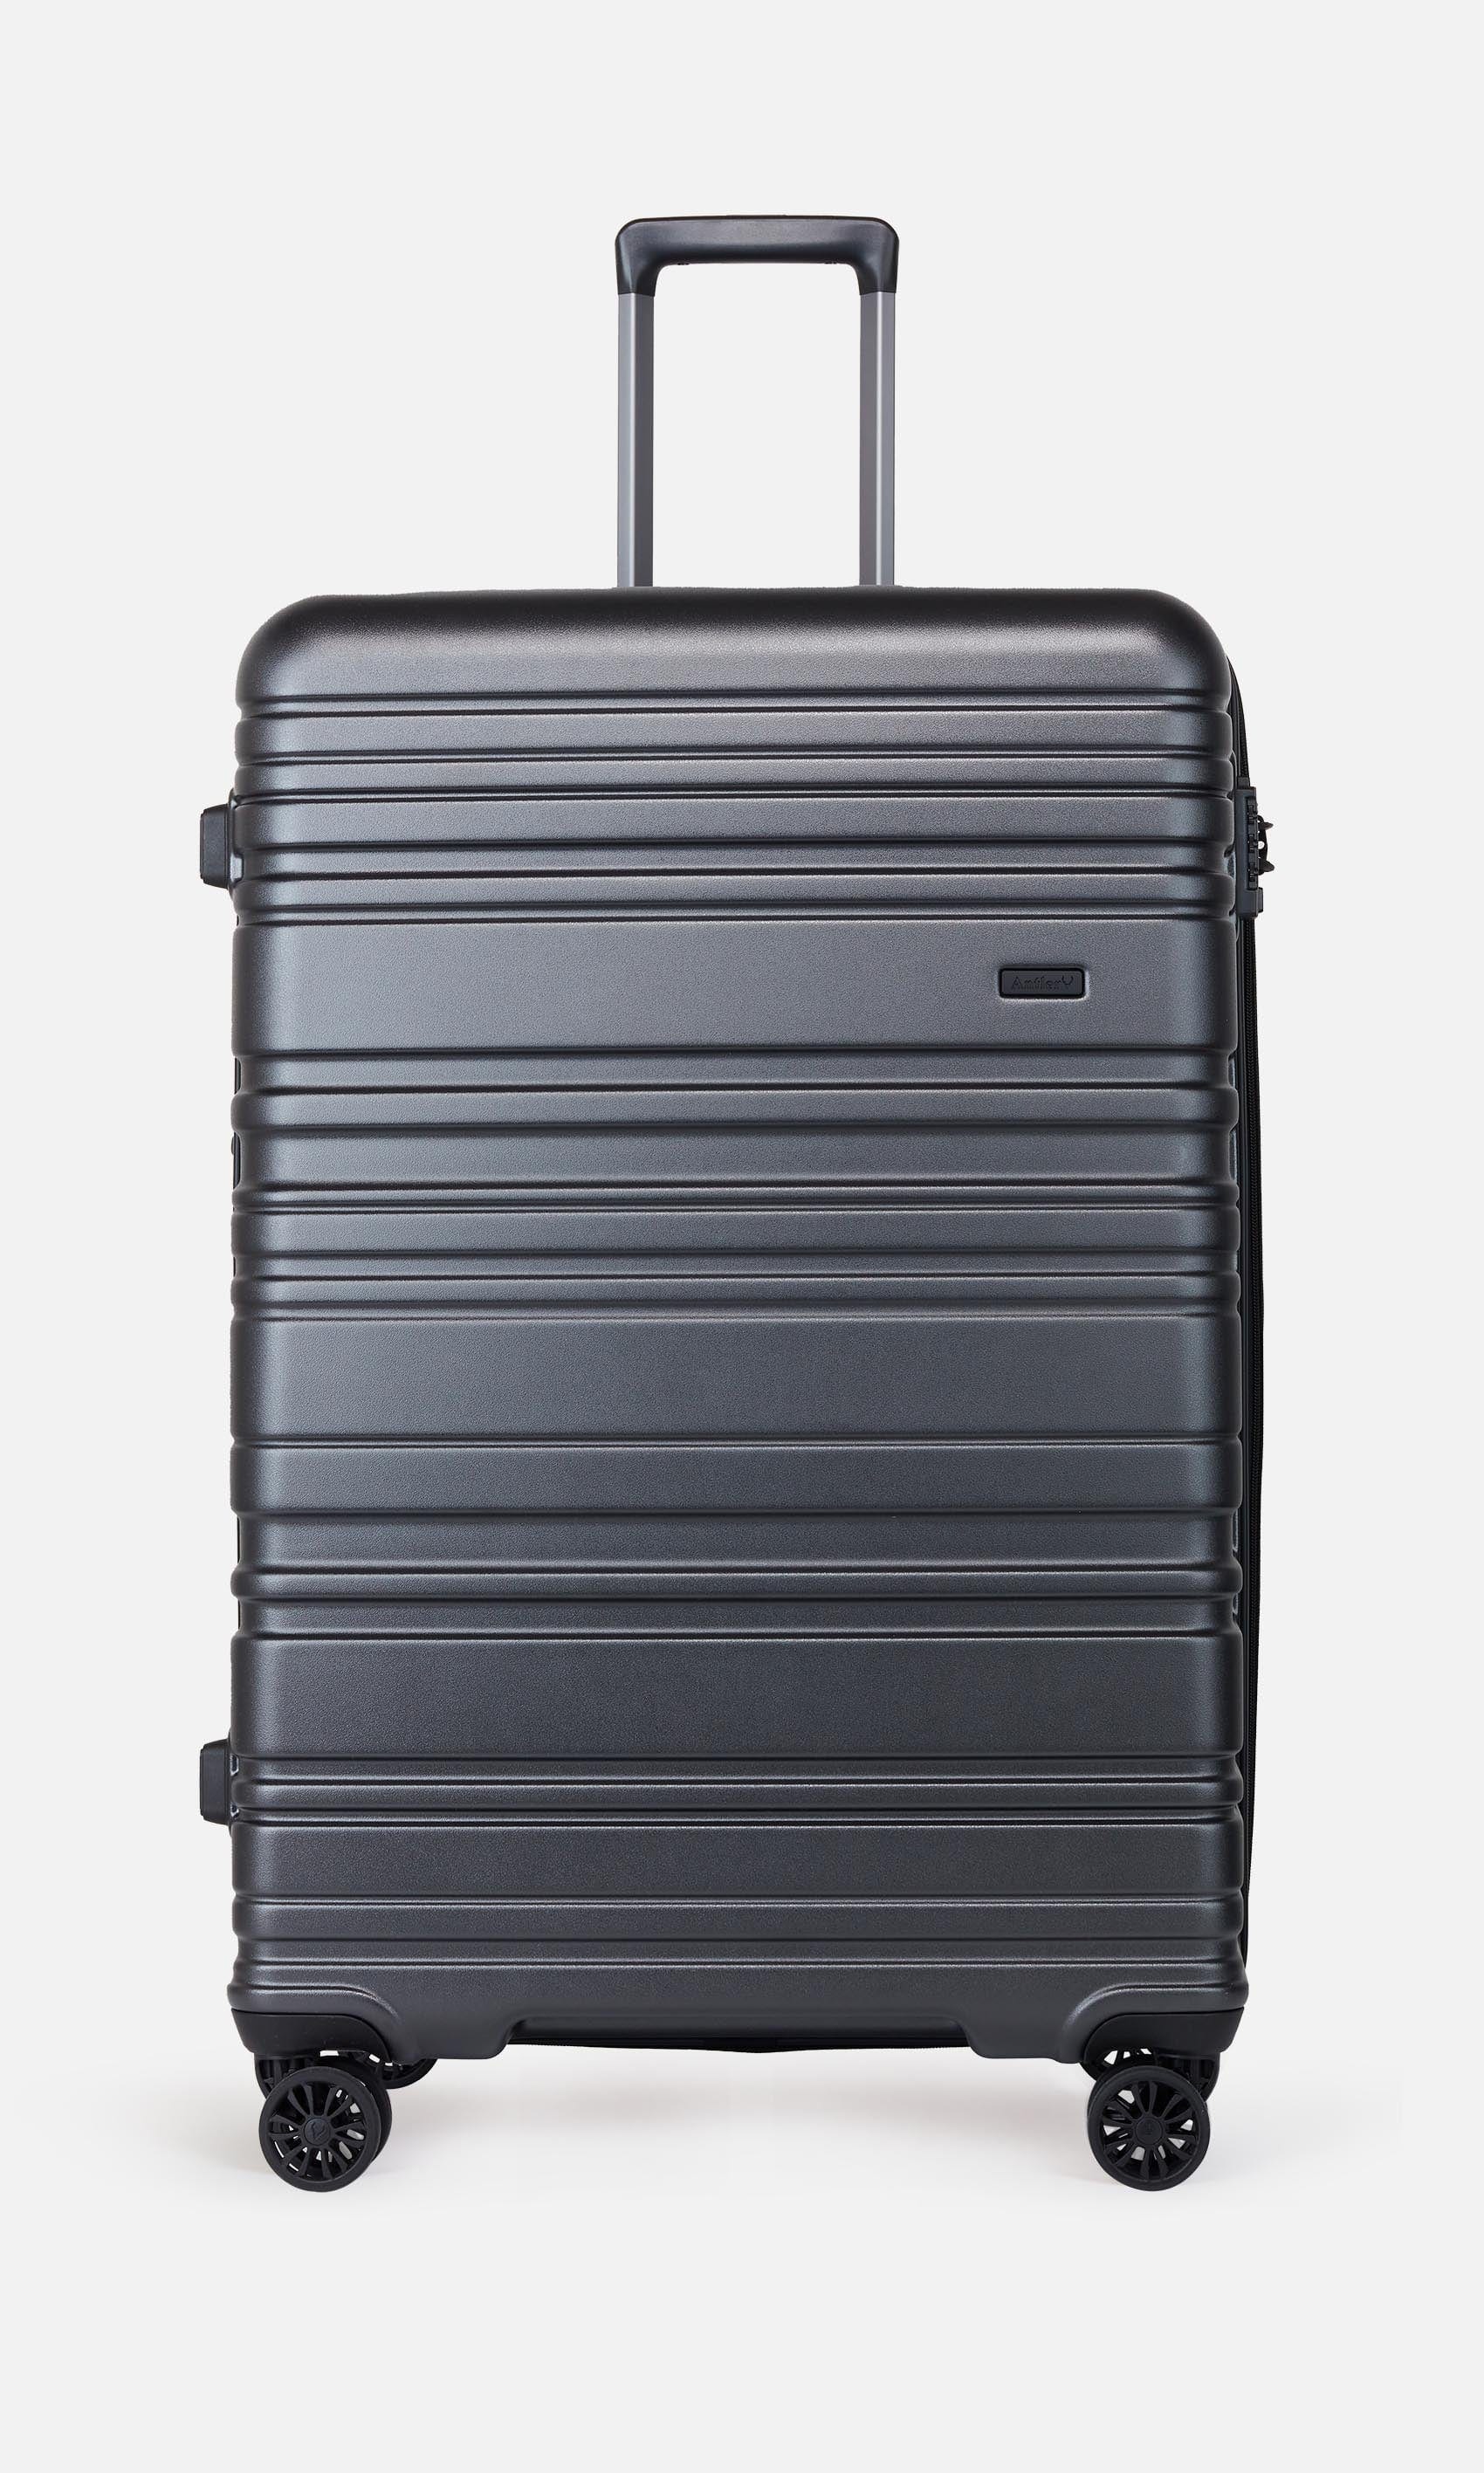 View Antler Saturn Large Suitcase In Charcoal Size 537 x 81 x 355 cm information